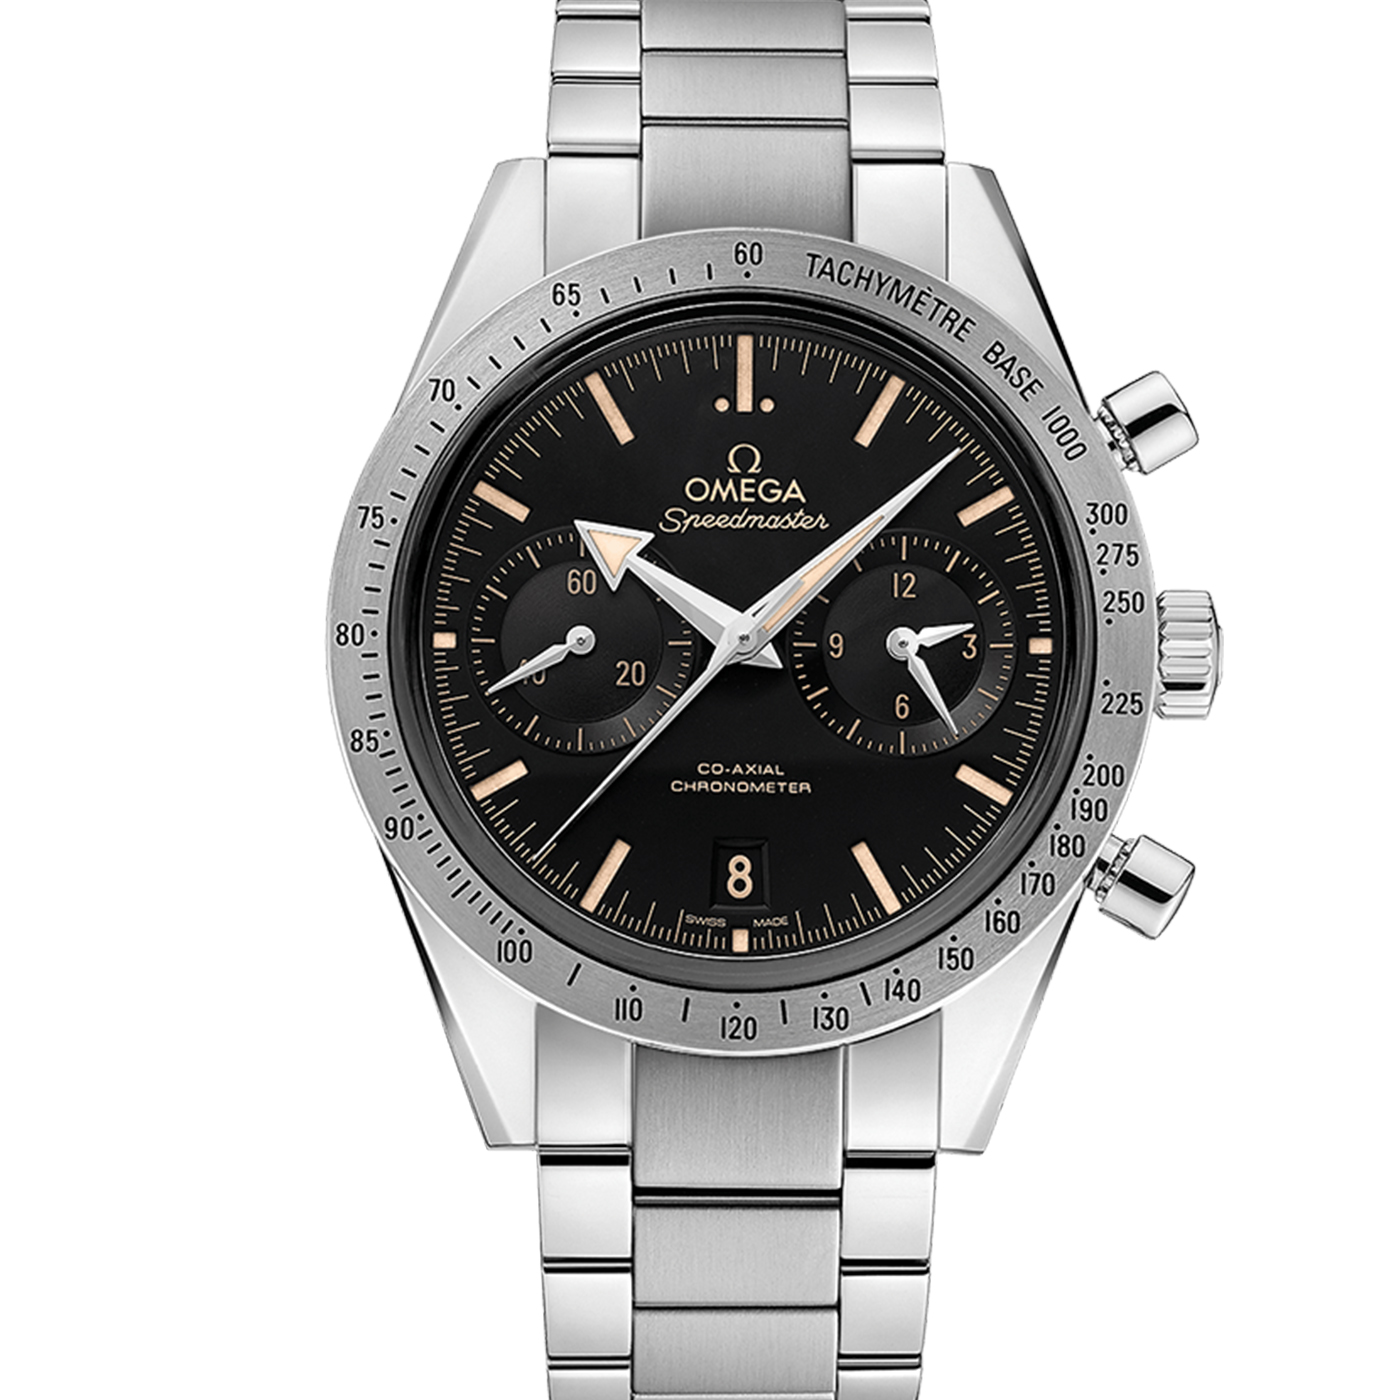 Omega Speedmaster 57 Chronograph Automatic Chronograph Date Mens watch 33110425101002